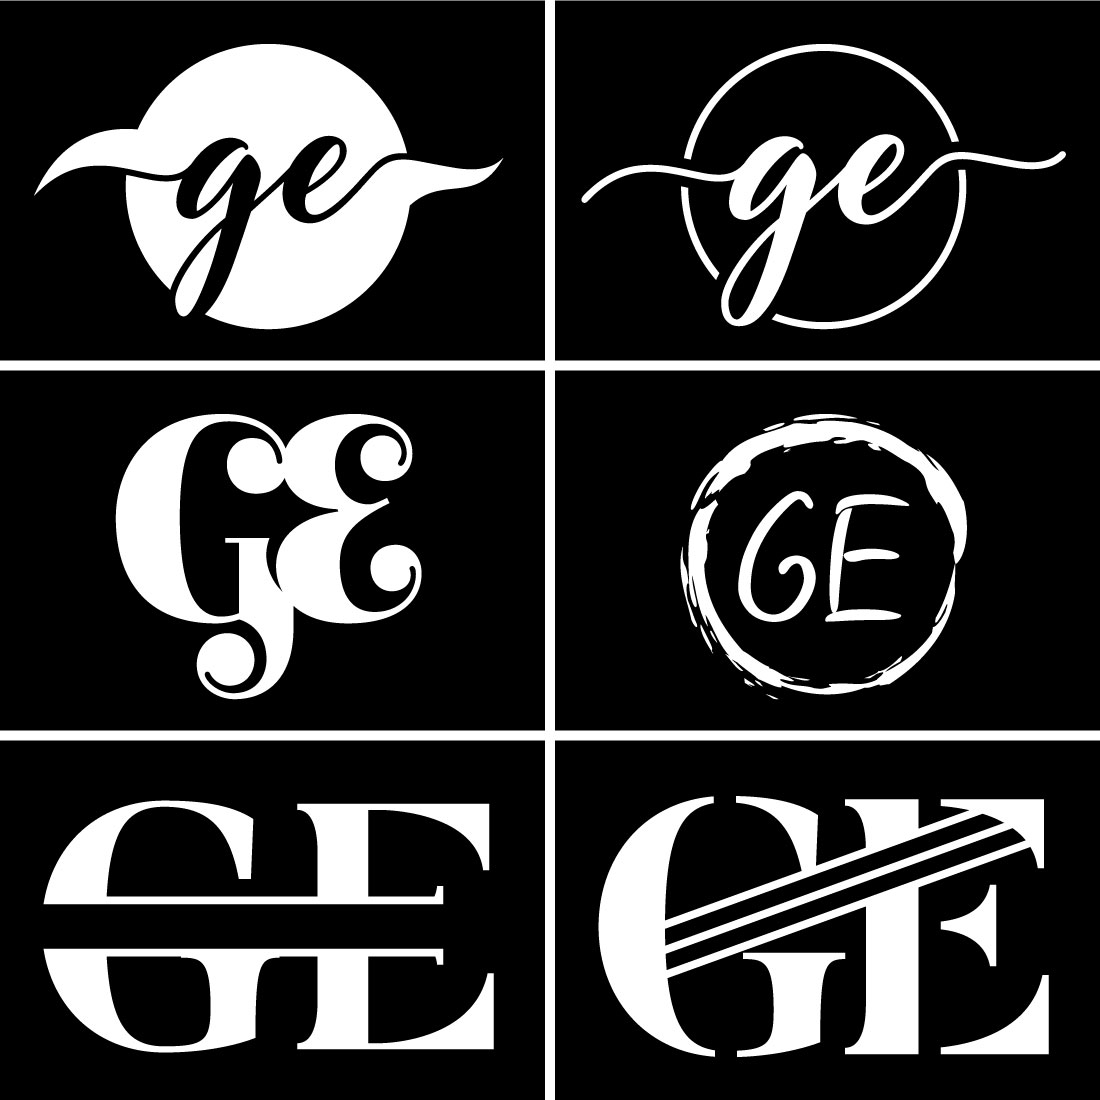 Gm monogram logo with circle outline design Vector Image